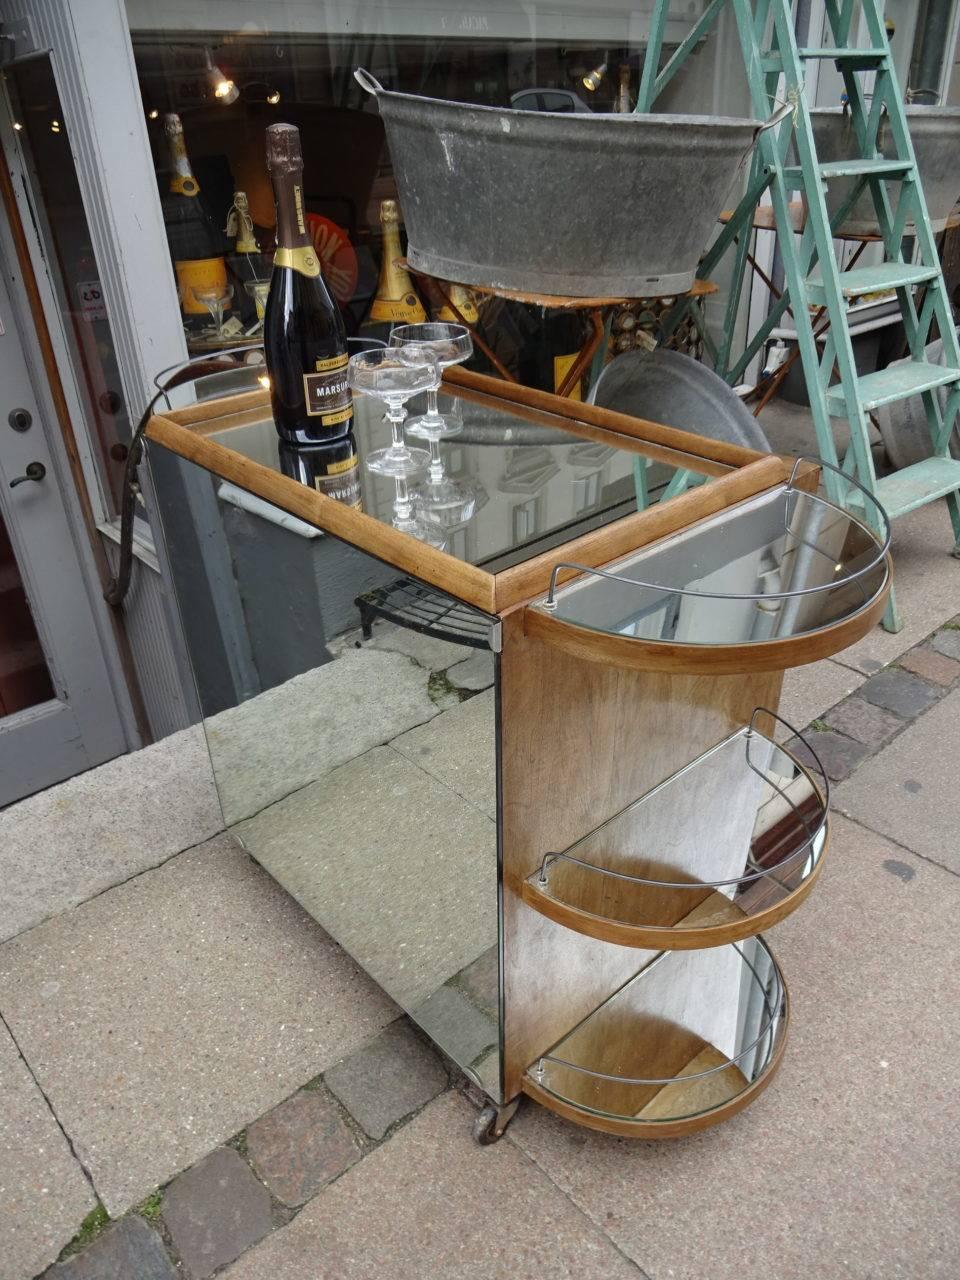 This wonderful French drinks cart/bar trolley displays all the hallmark elements of the Classic “ocean liner” Art Deco design of the 1930s. The rounded ends, with the polished chrome railings, simulate a ships deck. The etched mirror front door